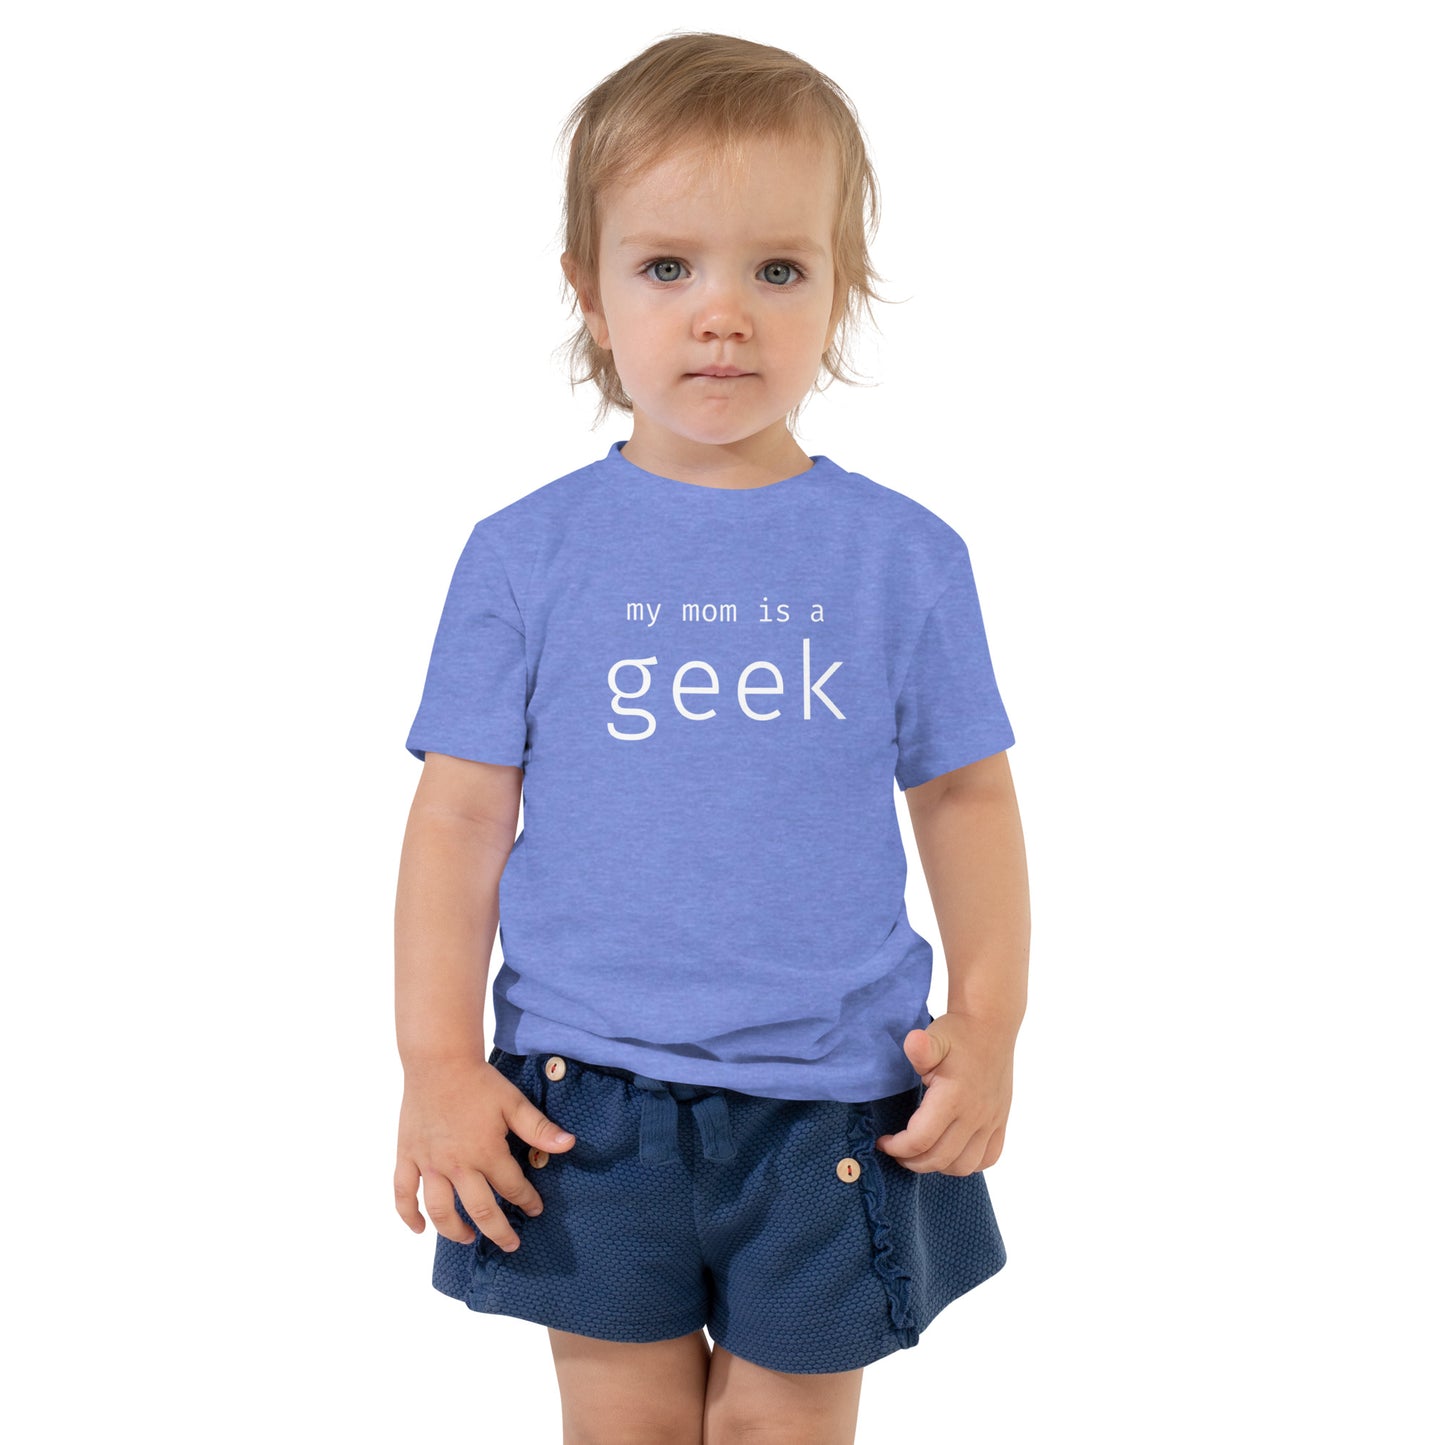 My mom is a geek - White Text - Toddler Short Sleeve Tee